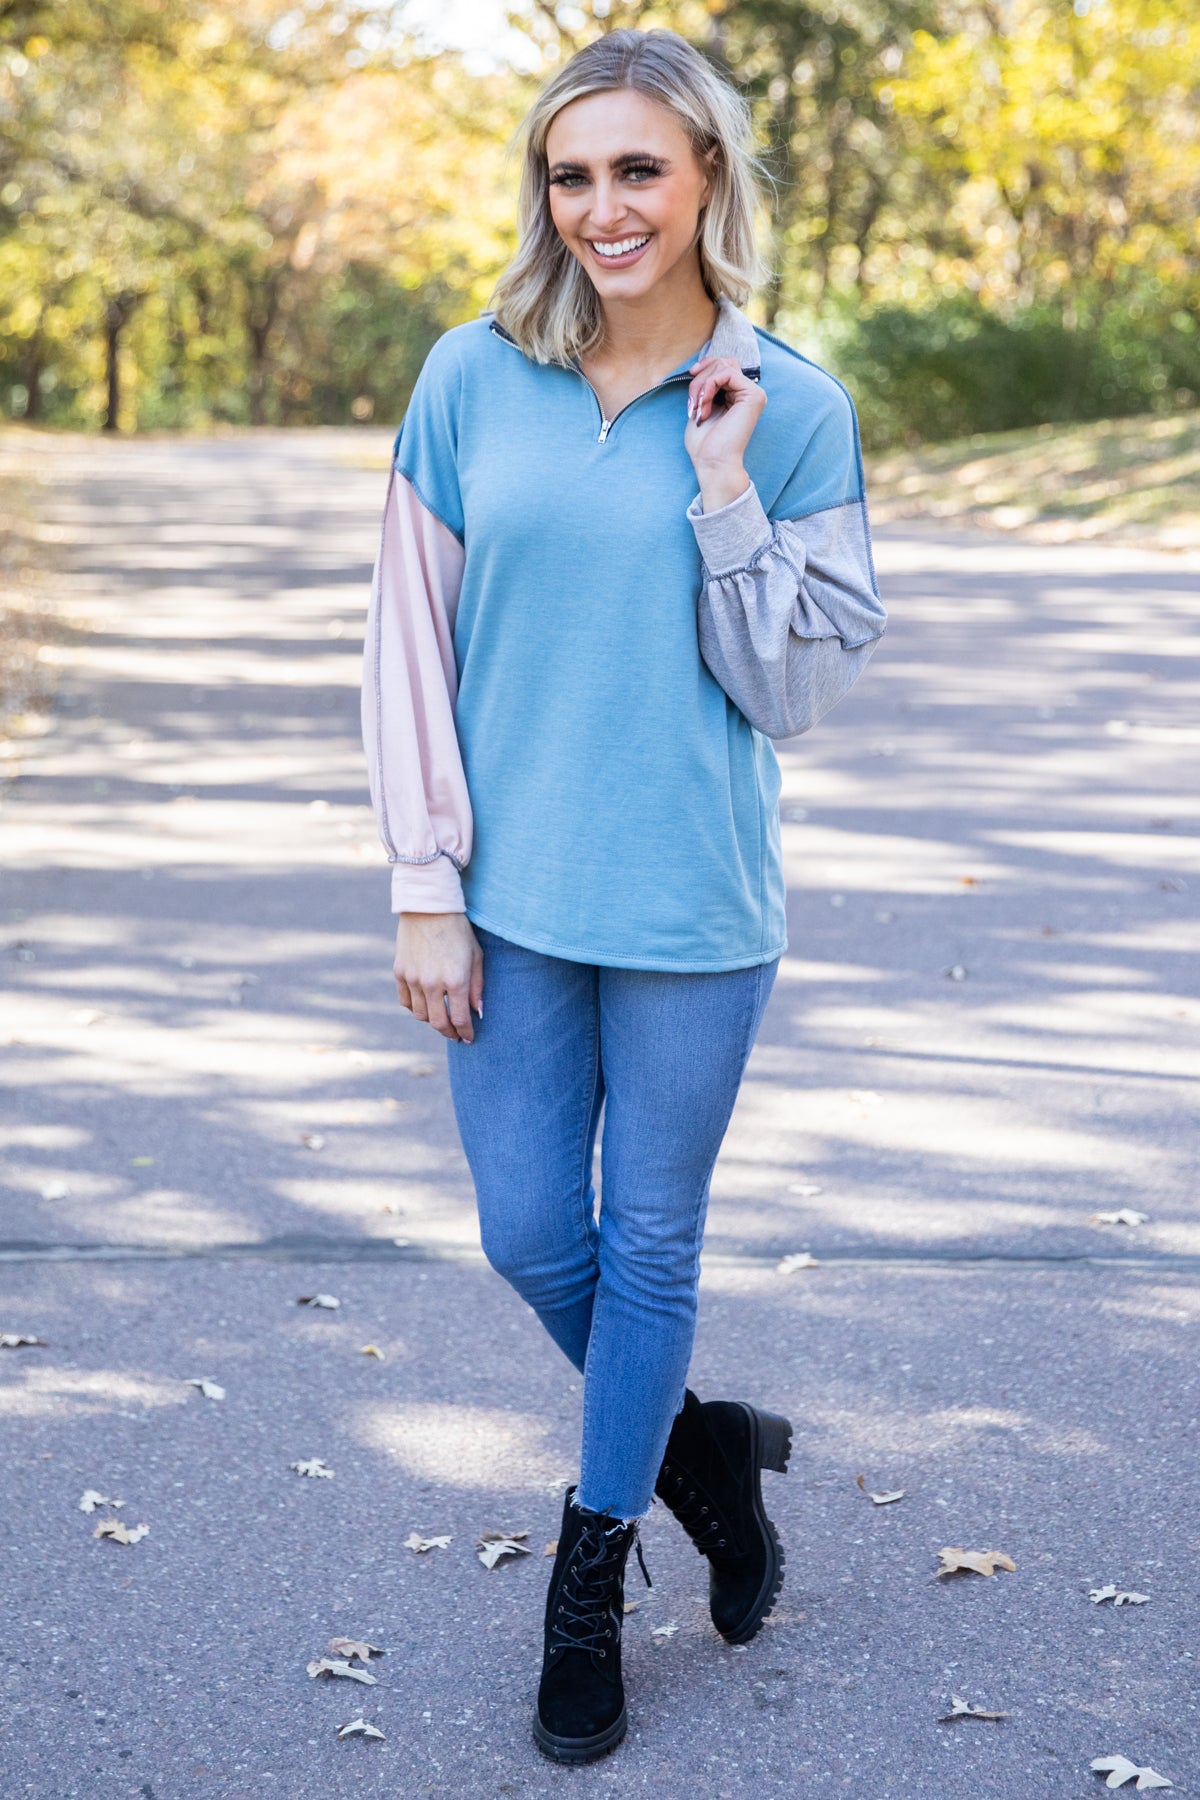 Dusty Blue Colorblock 1/4 Zip Top - Filly Flair